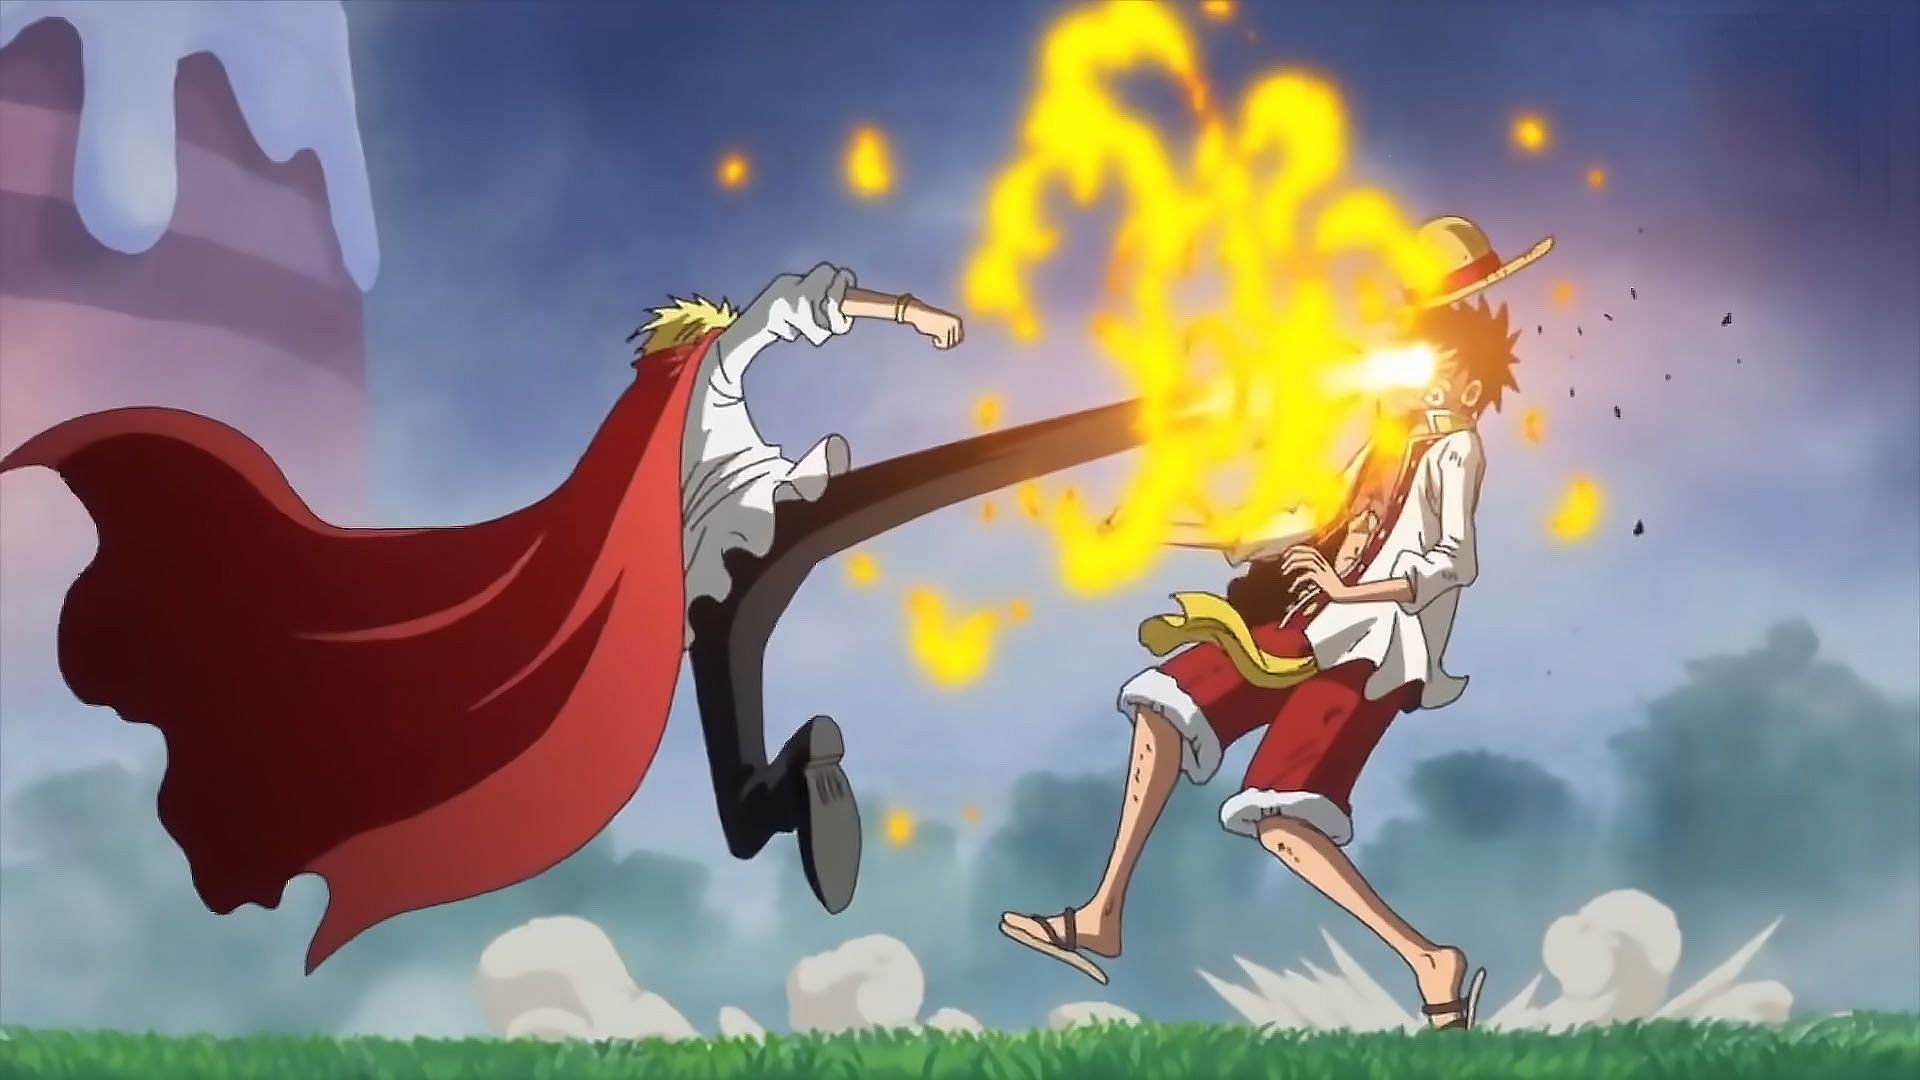 Episode 808 sees Sanji try to force himself to say goodbye to Luffy and co (Image via Toei Animation)